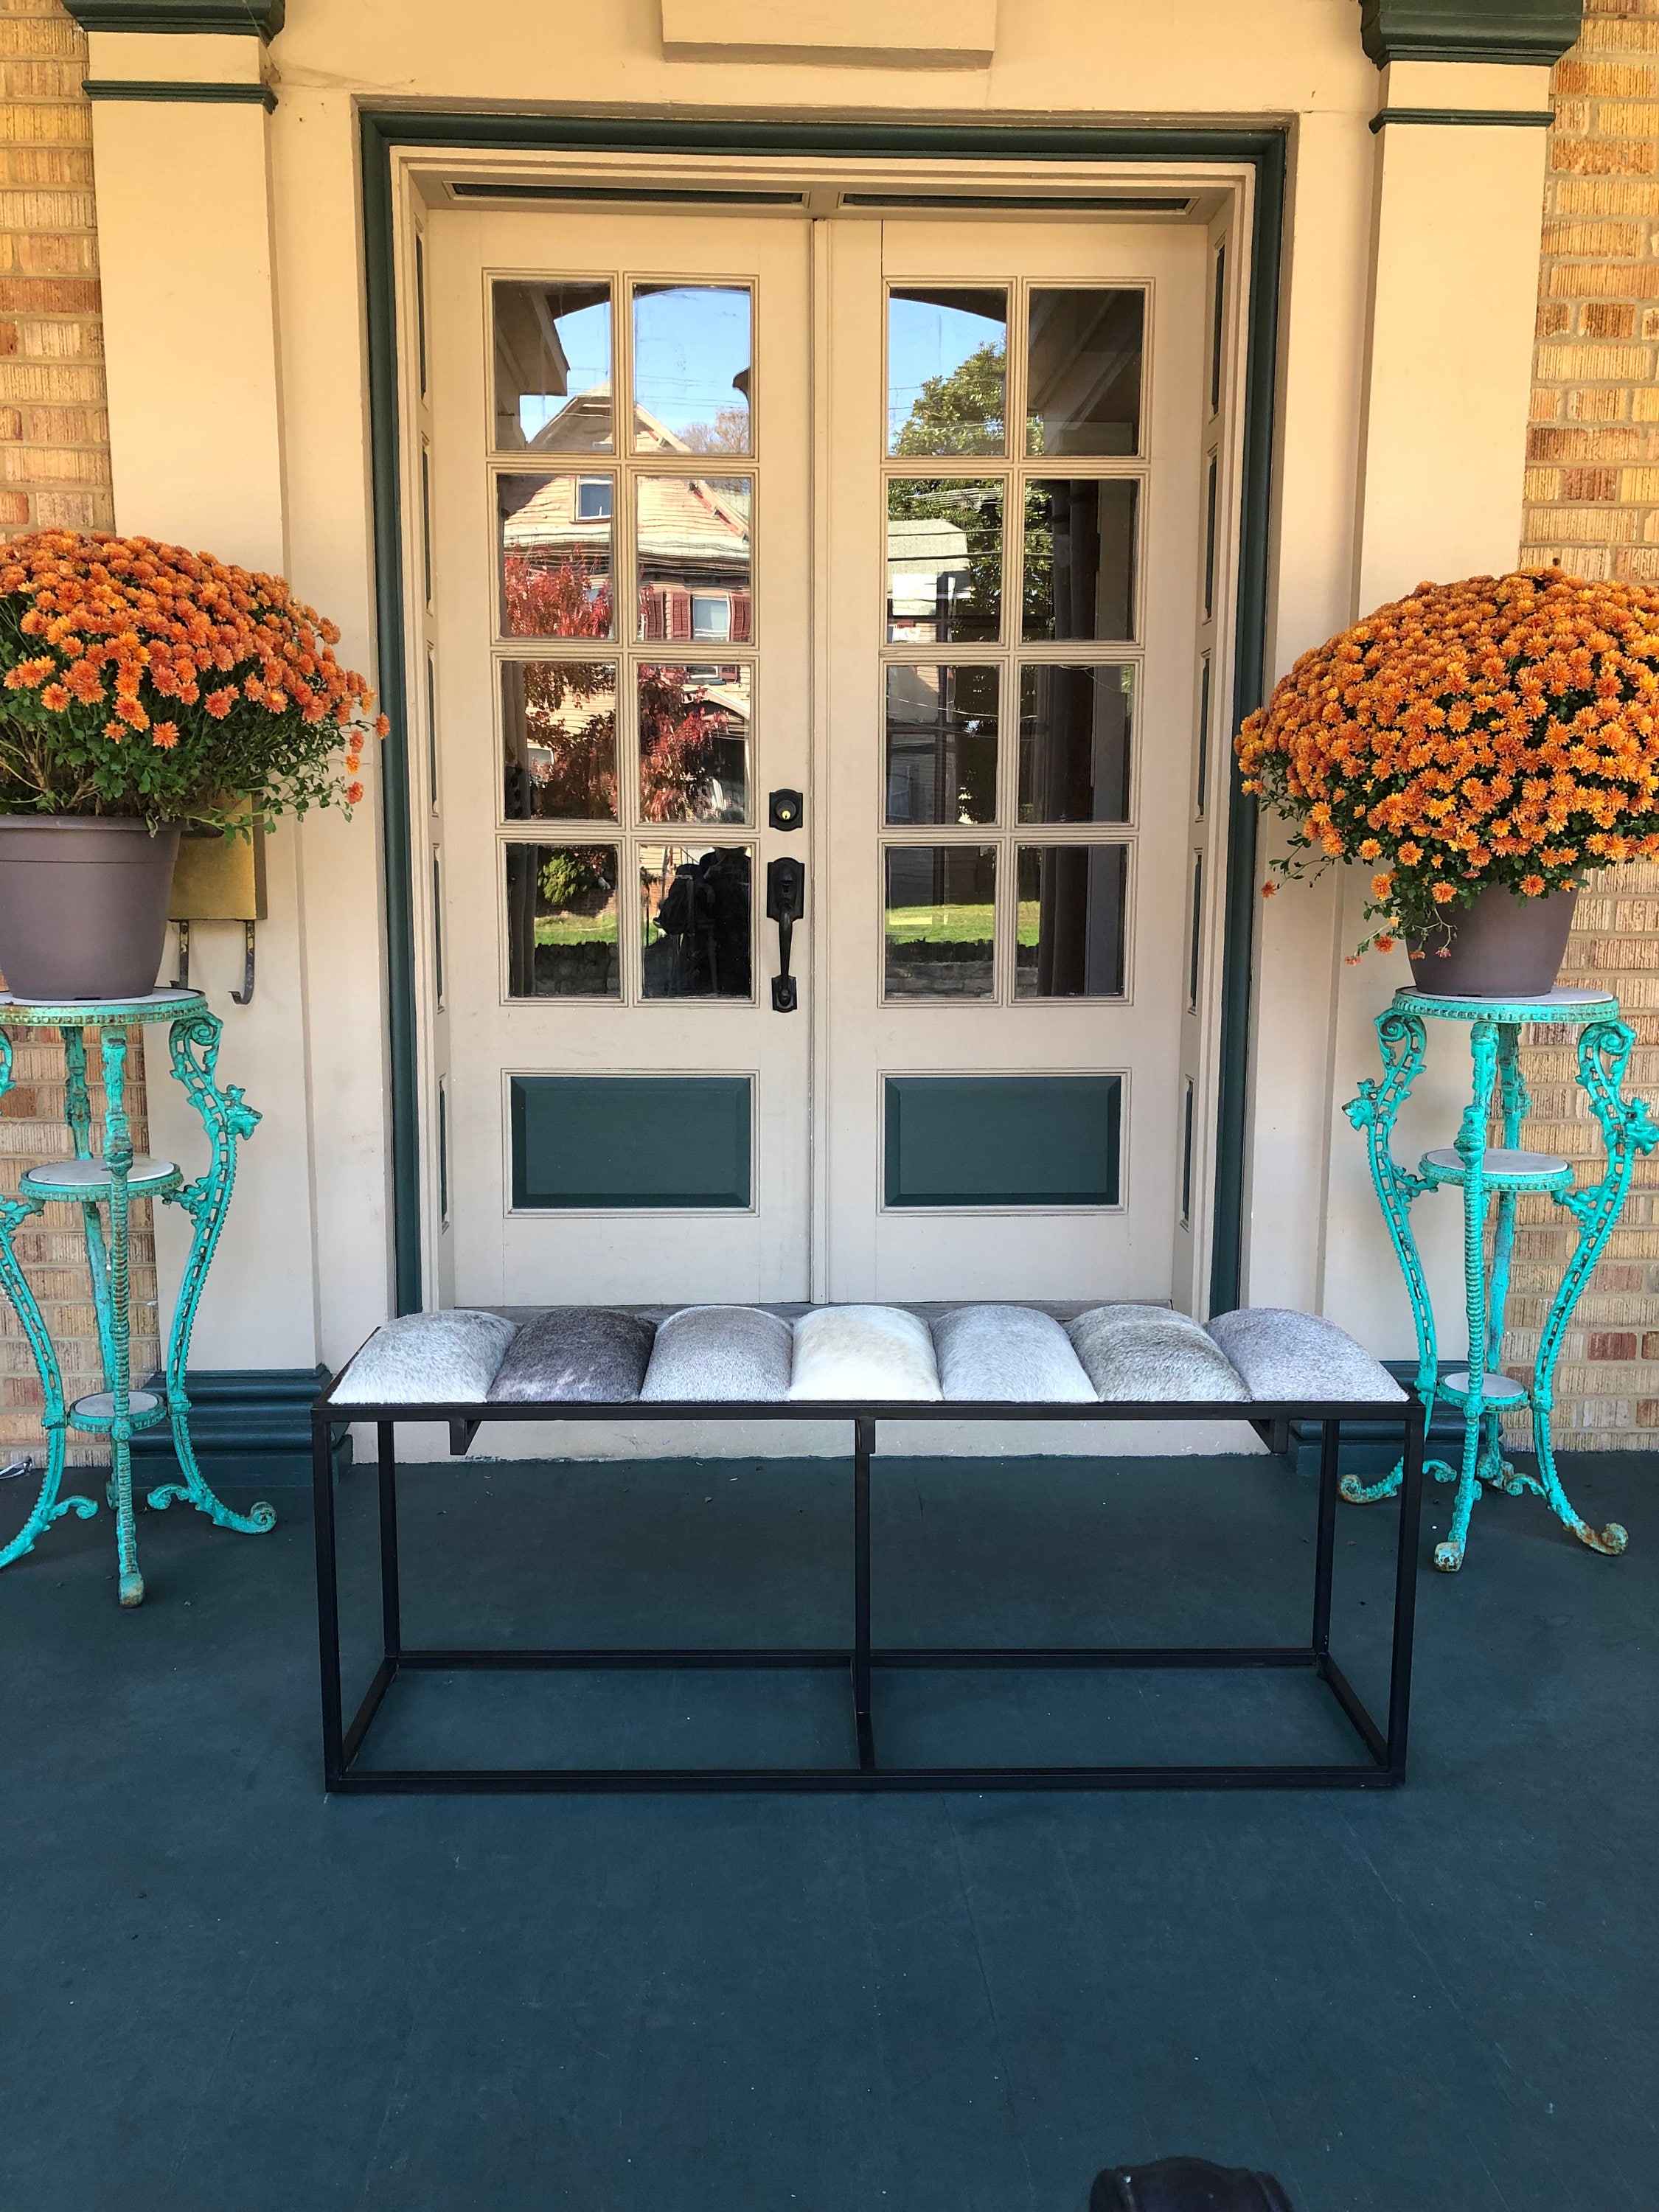 Easy DIY bench cushion with removable cover - Hydrangea Treehouse